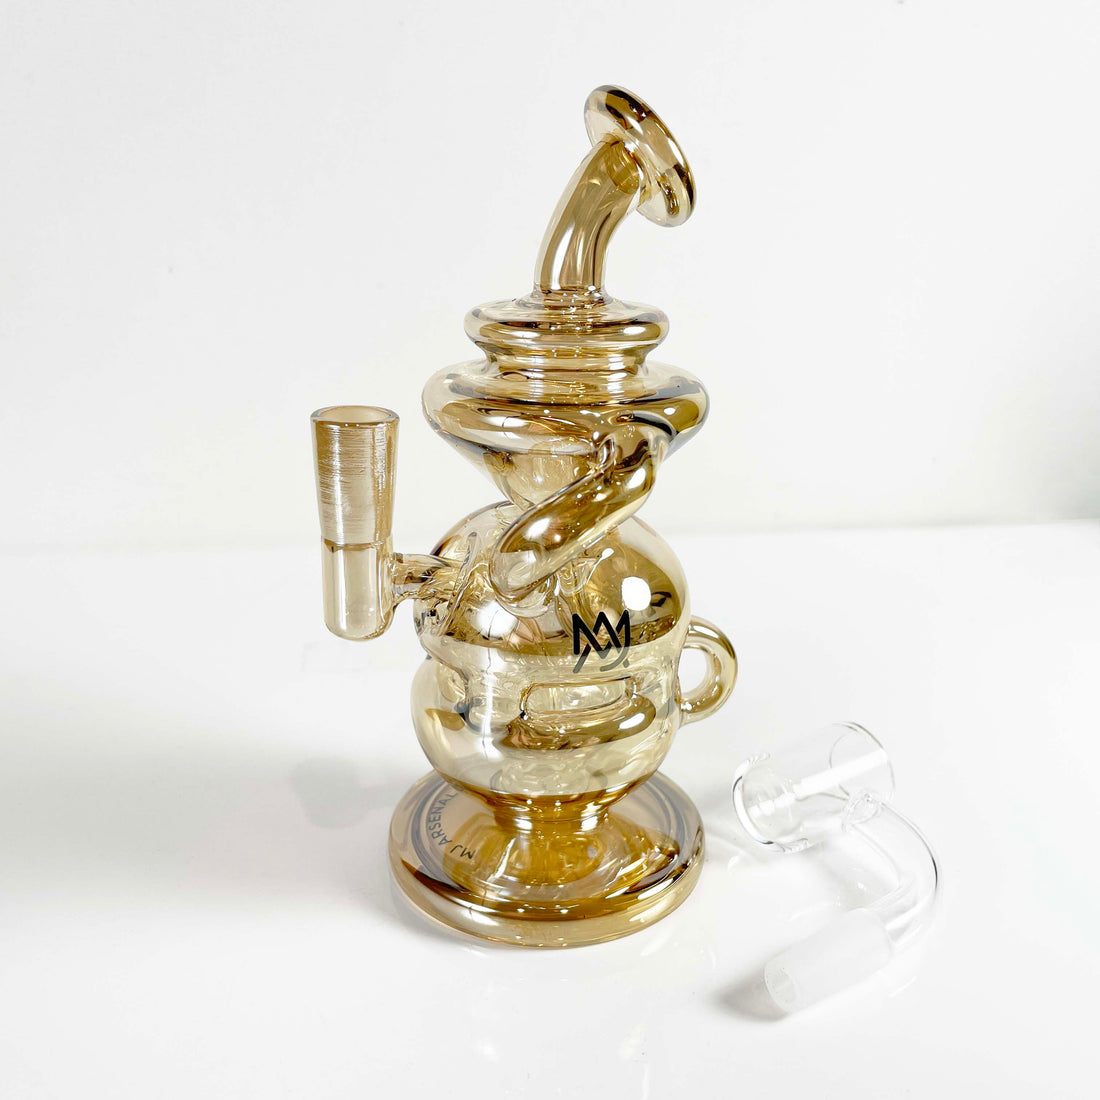 MJ Arsenal Gold Infinity Mini Rig Limited Edition Bliss Shop Chicago